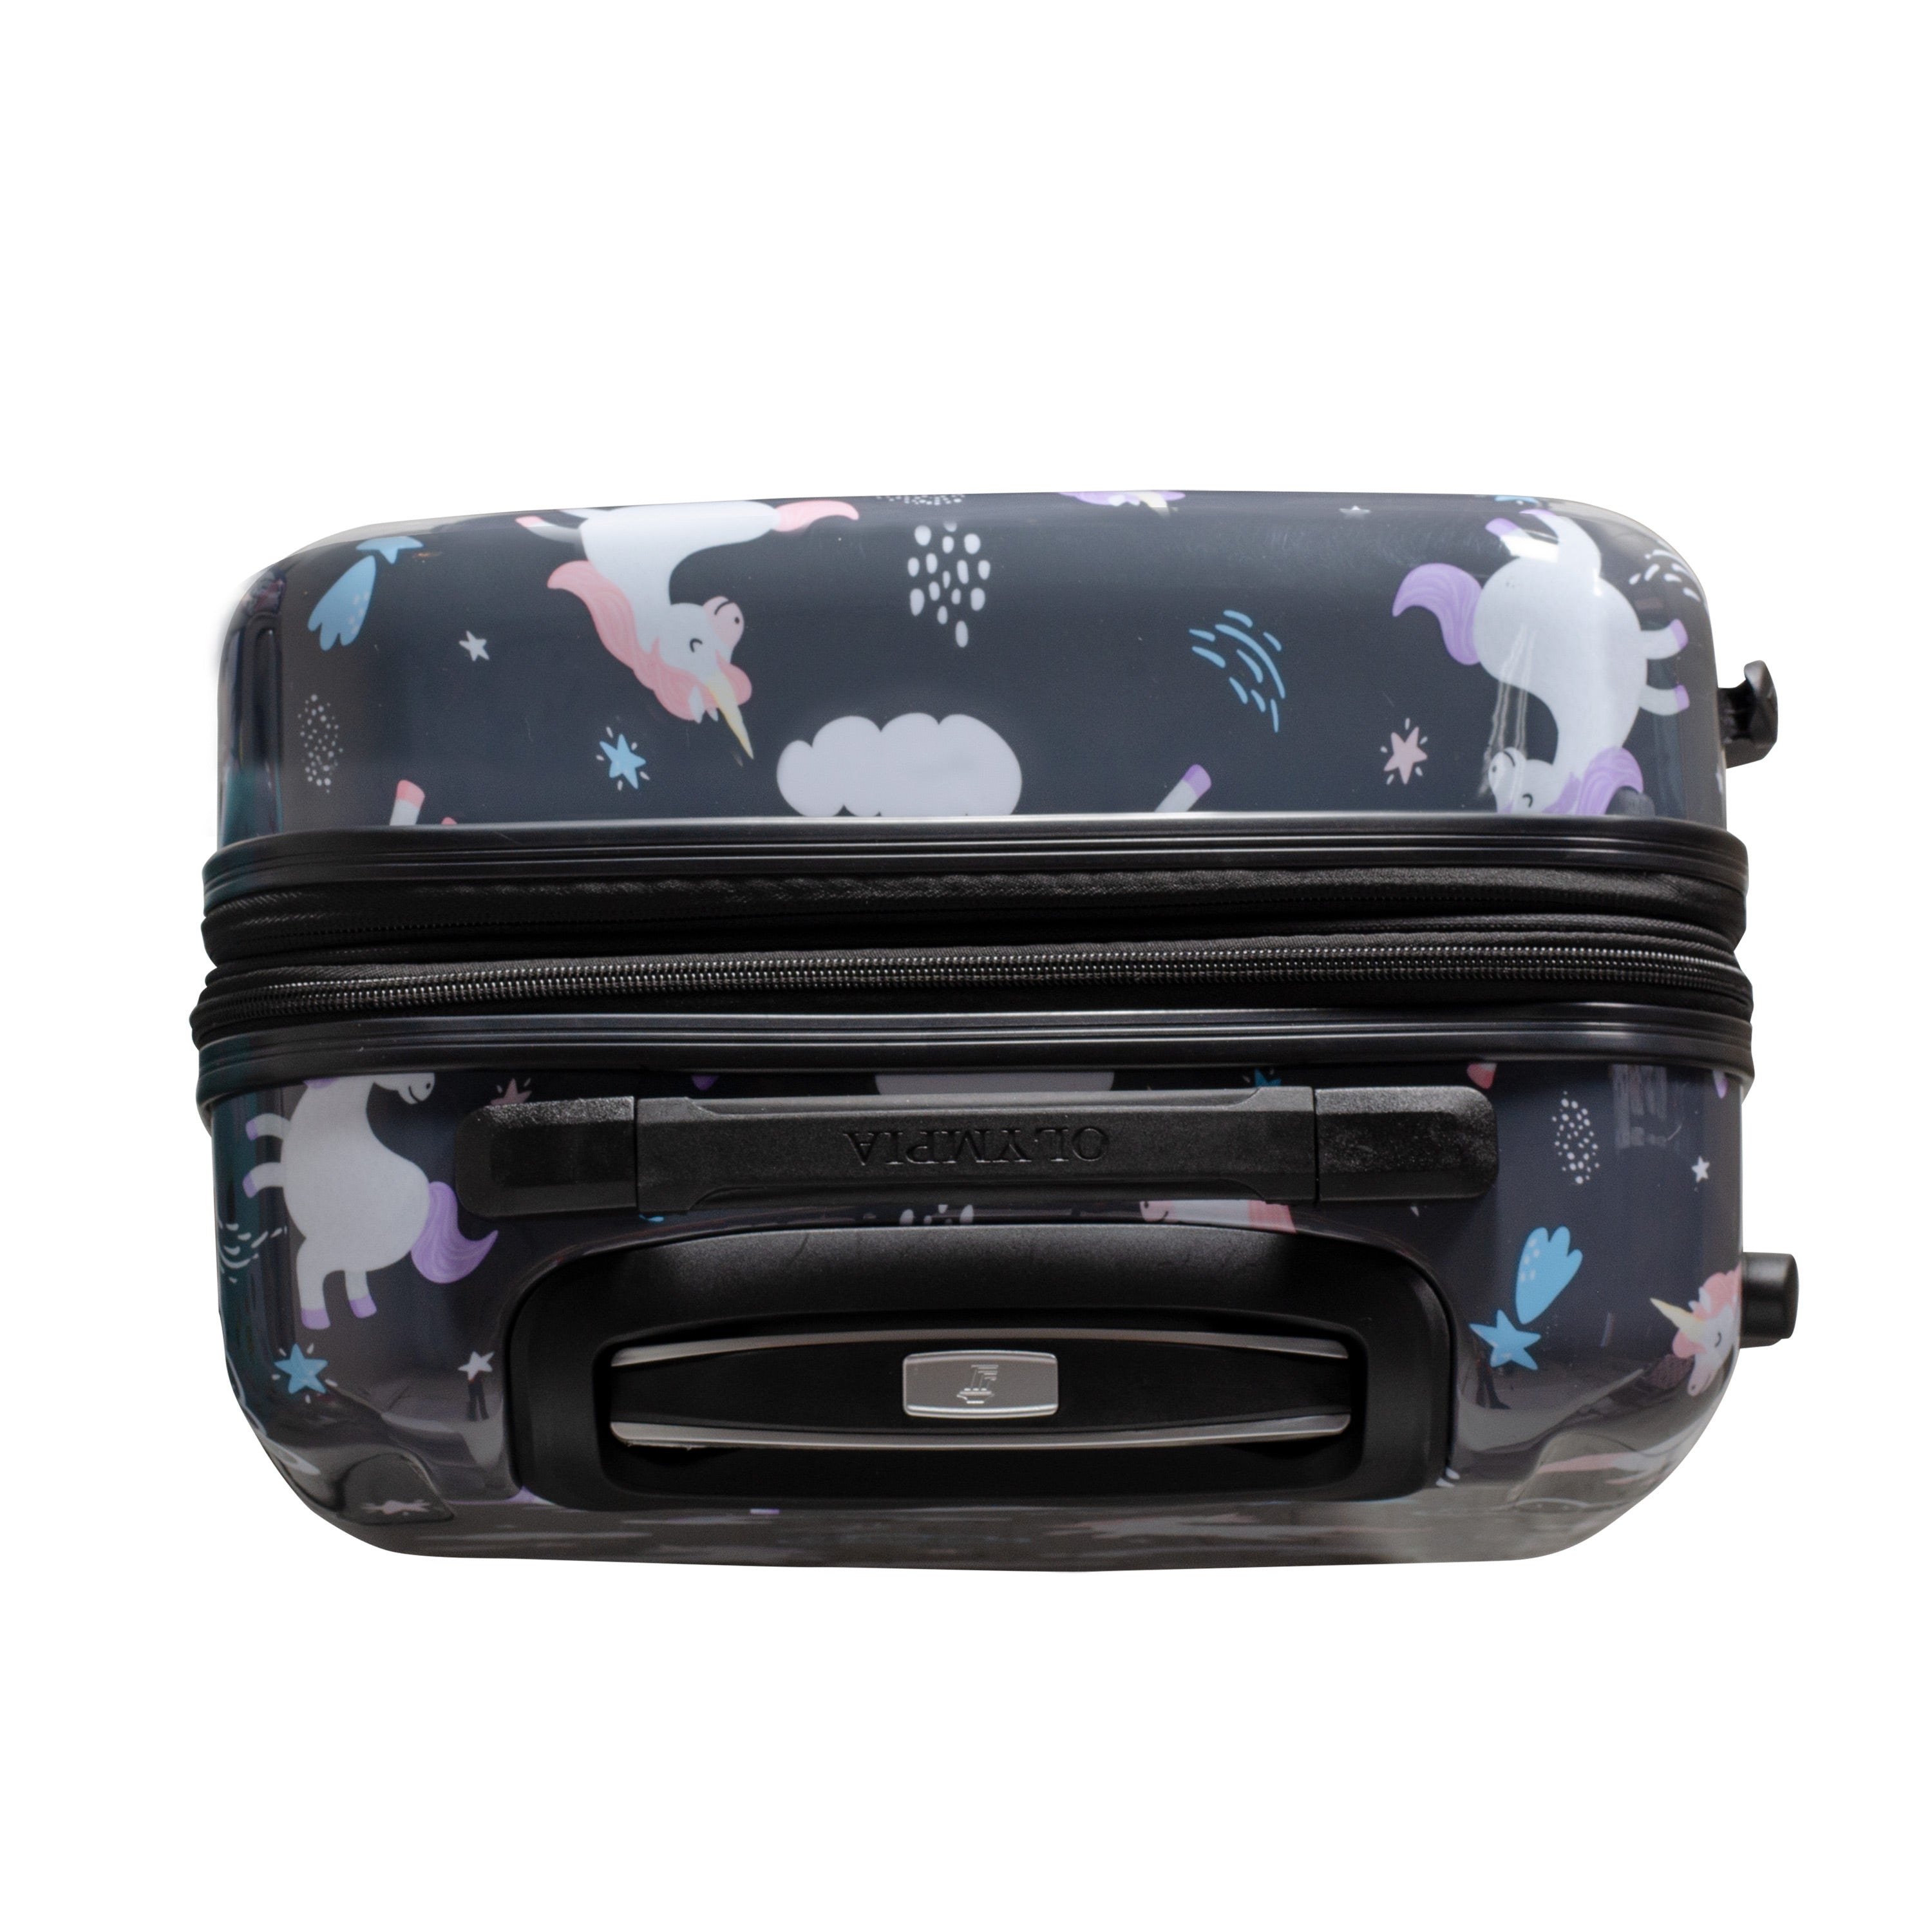 {Mother's Day Special}Metropolitan 21" Lightweight Expandable Carry-On